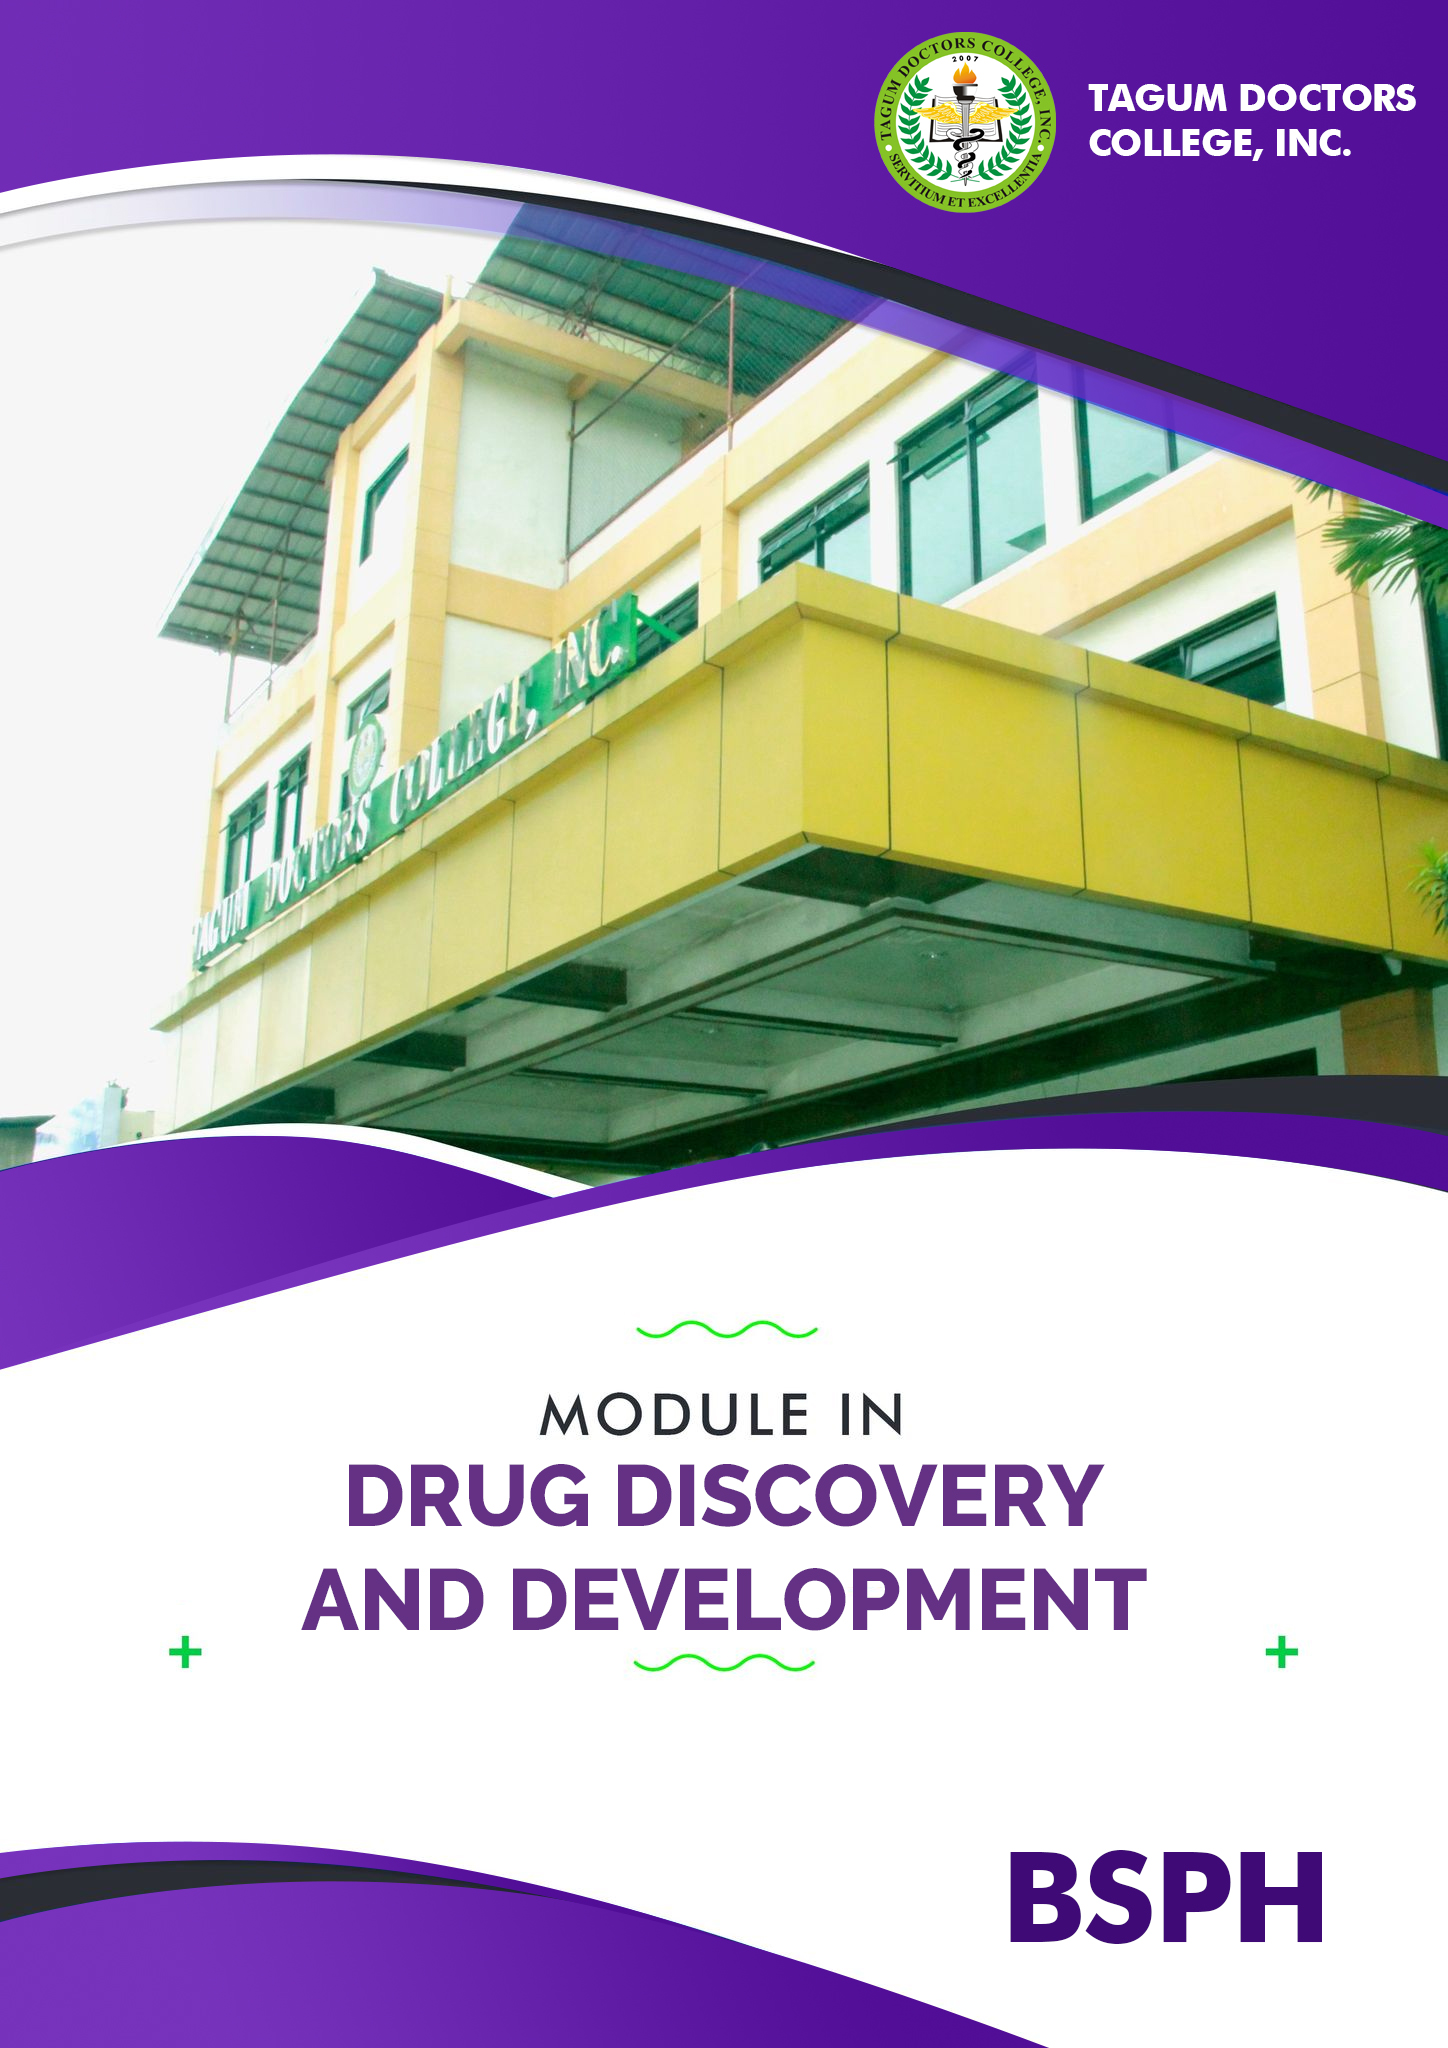 Drug Discovery and Development  - BSPh 3A